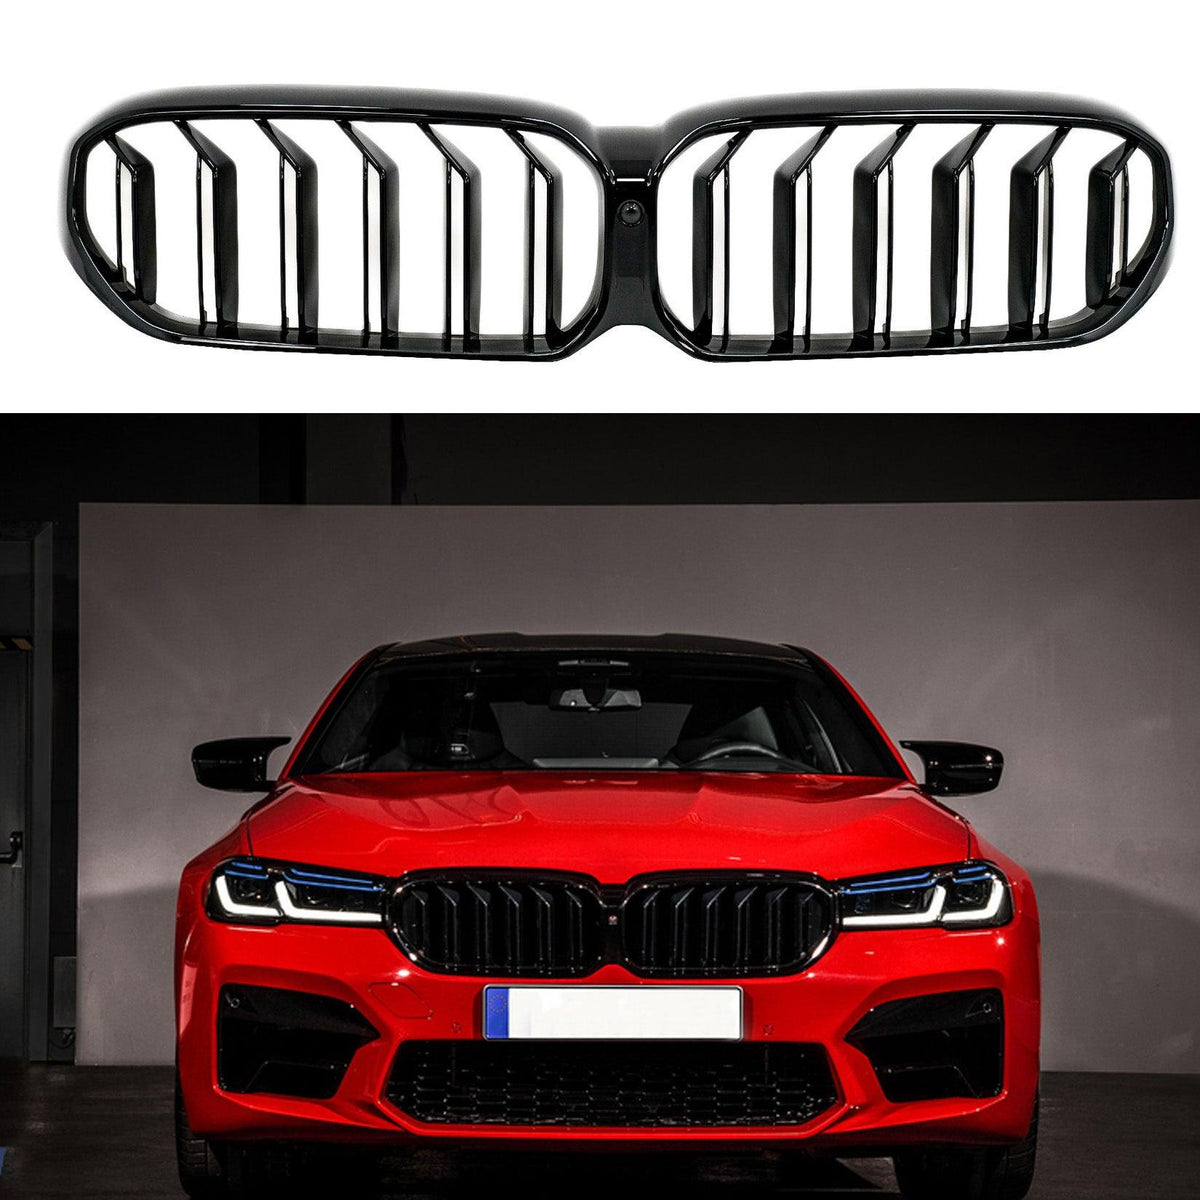 BMW 5 SERIES G30/G31 2020+ LCI UPGRADE FRONT GRILL IN GLOSS BLACK - M5 LOOK - RisperStyling